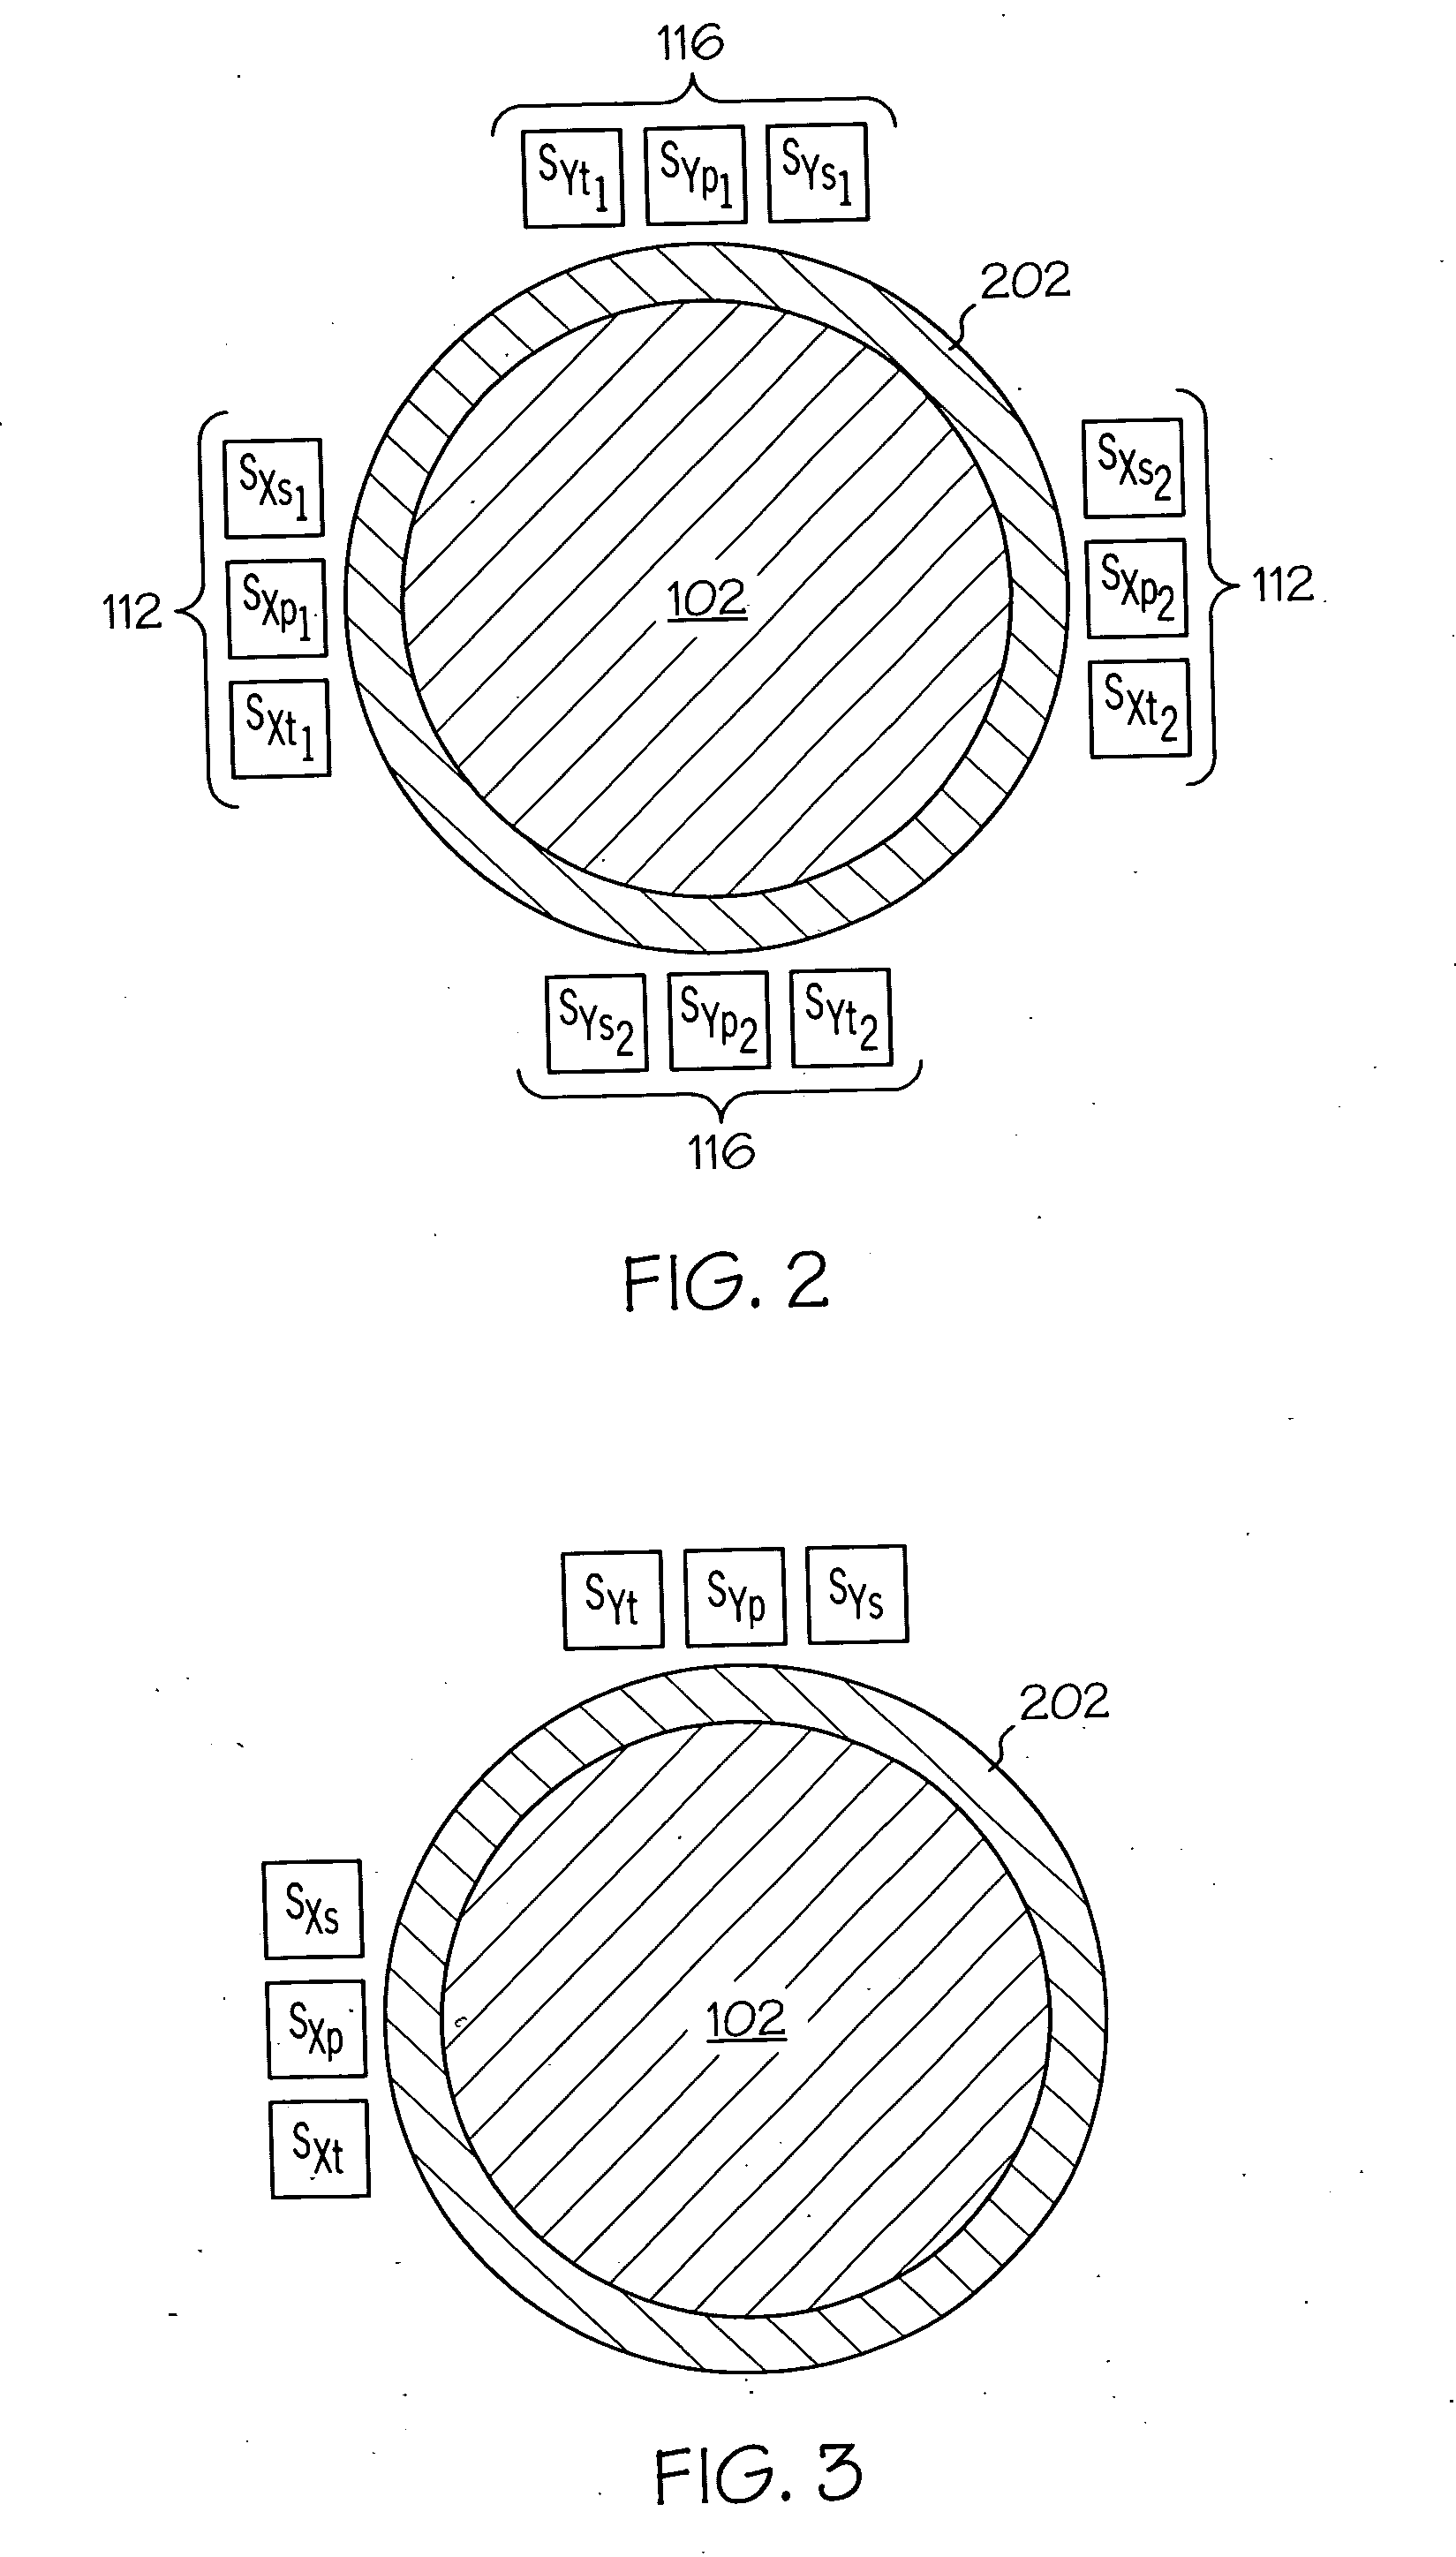 Fault-tolerant magnetic bearing position sensing and control system